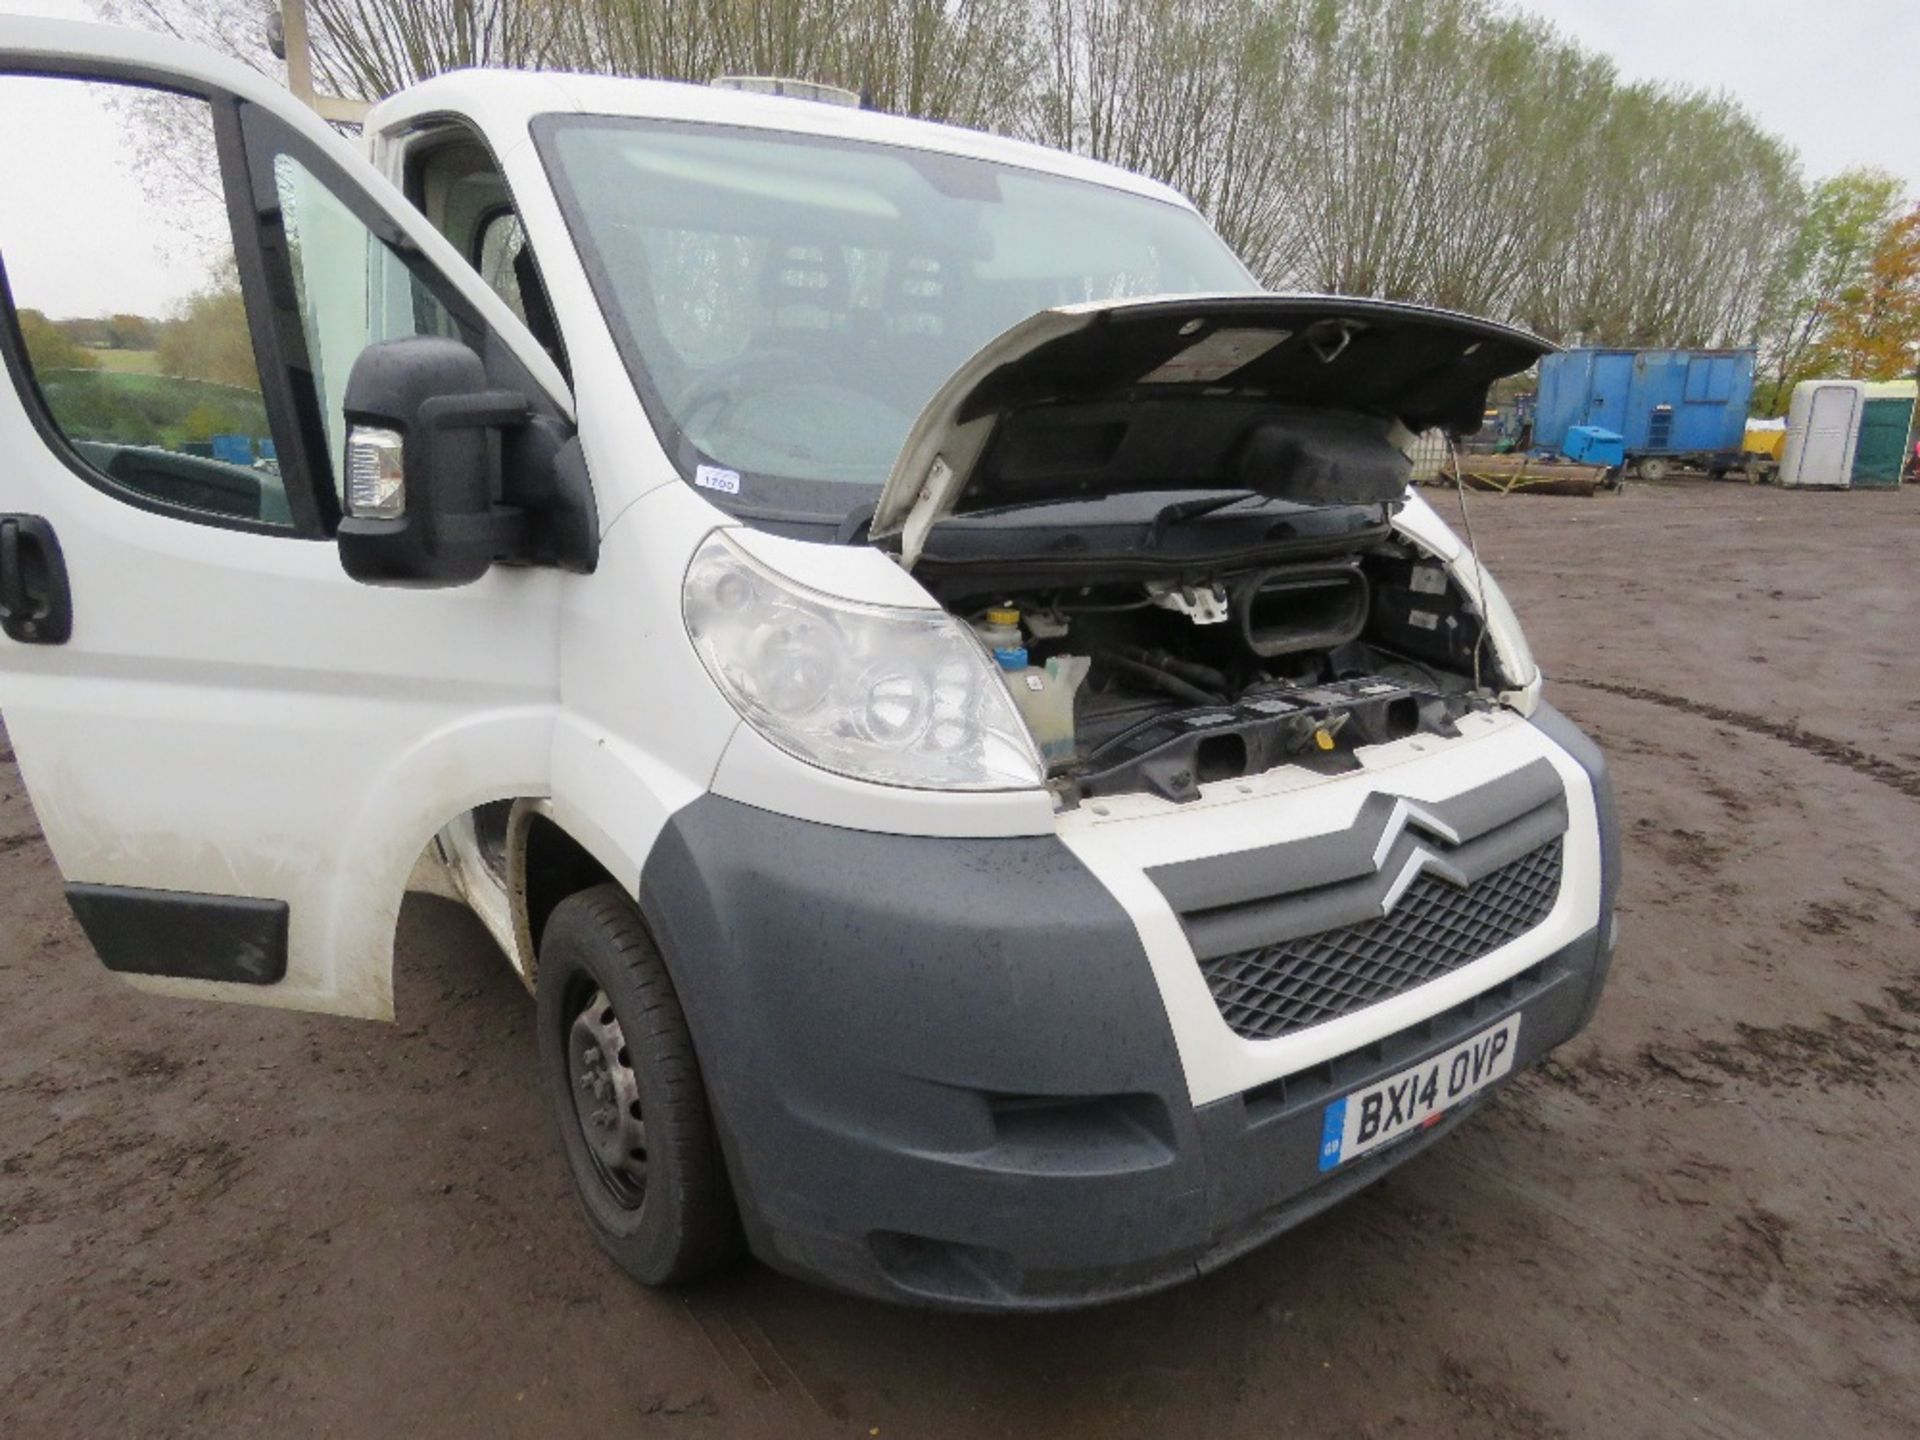 CITROEN LOW BED PLANT TRUCK, REG:BX14 OVP. 3500KG RATED WITH RAMPS. 125,870 REC MILES. WITH V5, MOT - Image 2 of 13